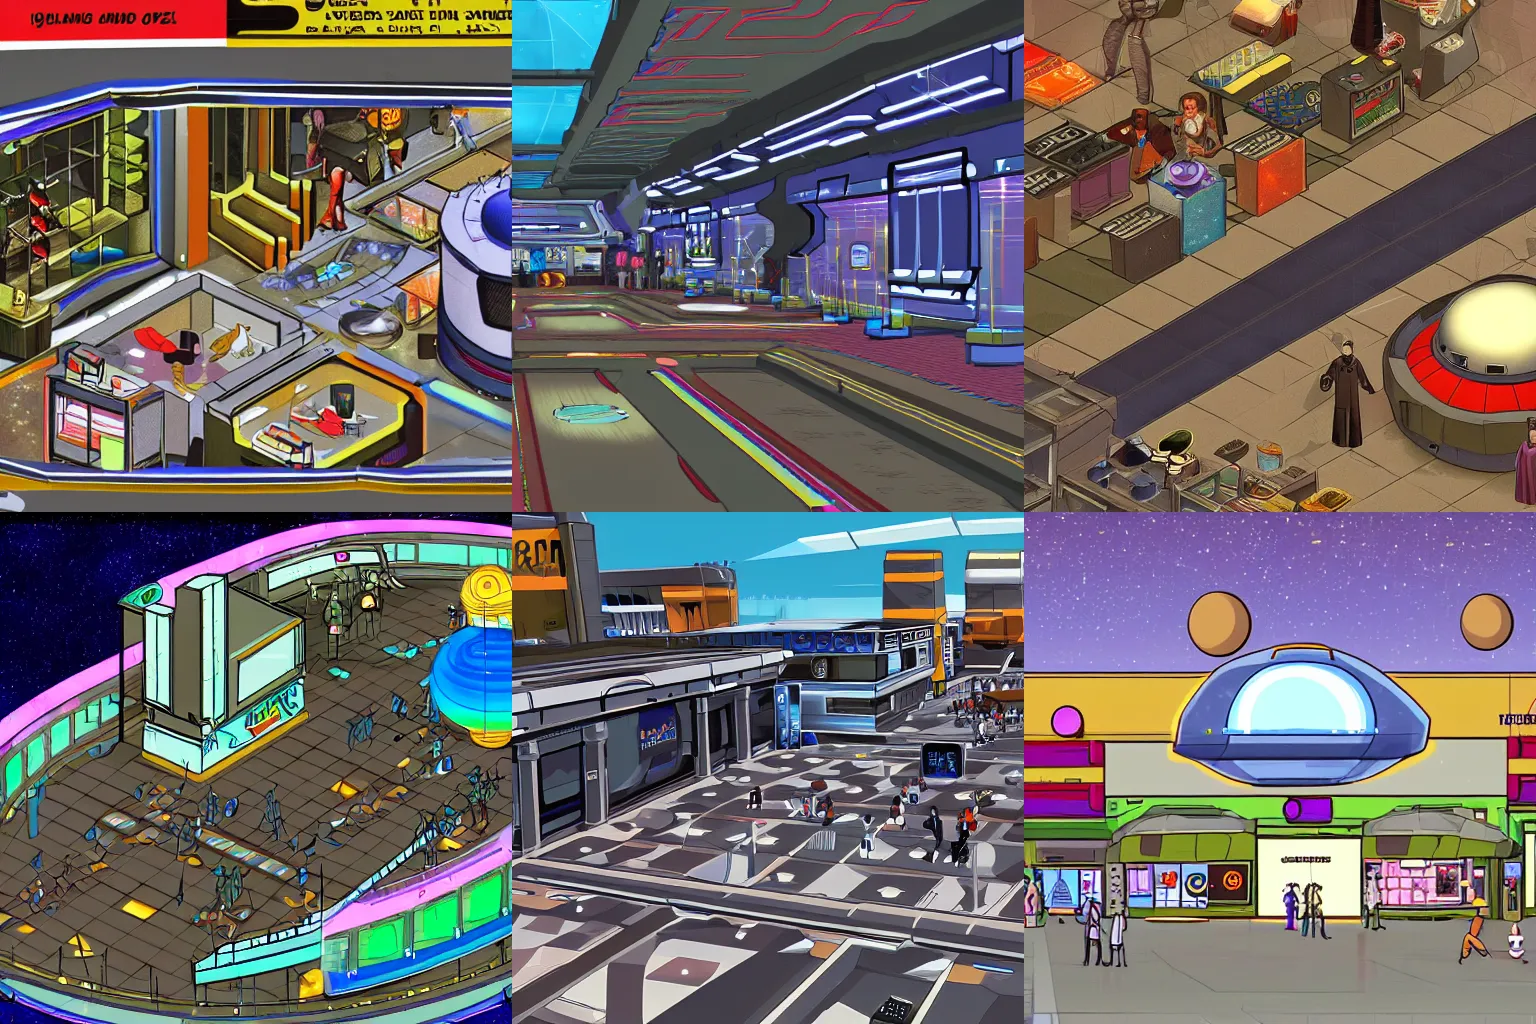 Prompt: a large open plaza with a clothing store at the side, inside a large passenger spaceship, from a space themed point and click 2D graphic adventure game, made in 1999, high quality graphics